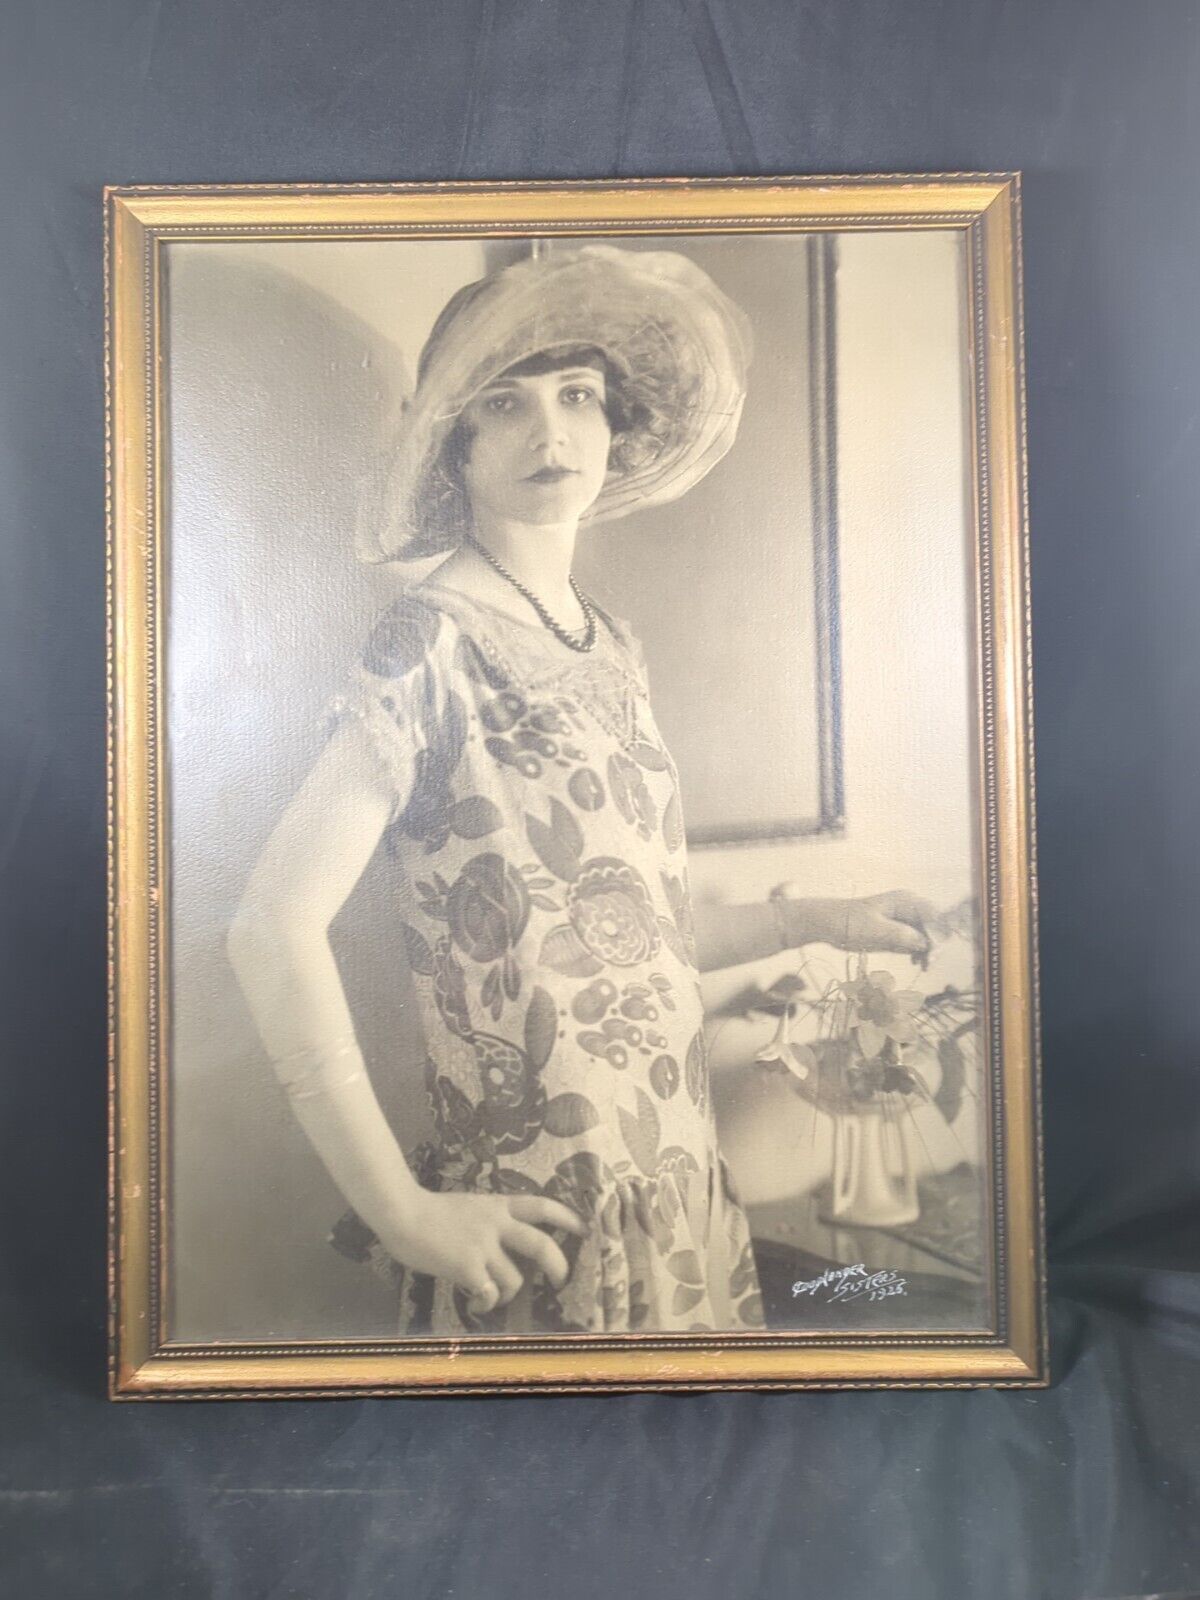 1925 Photograph Young Lady Black & White Ornate Framed Signed Goodlander Sisters